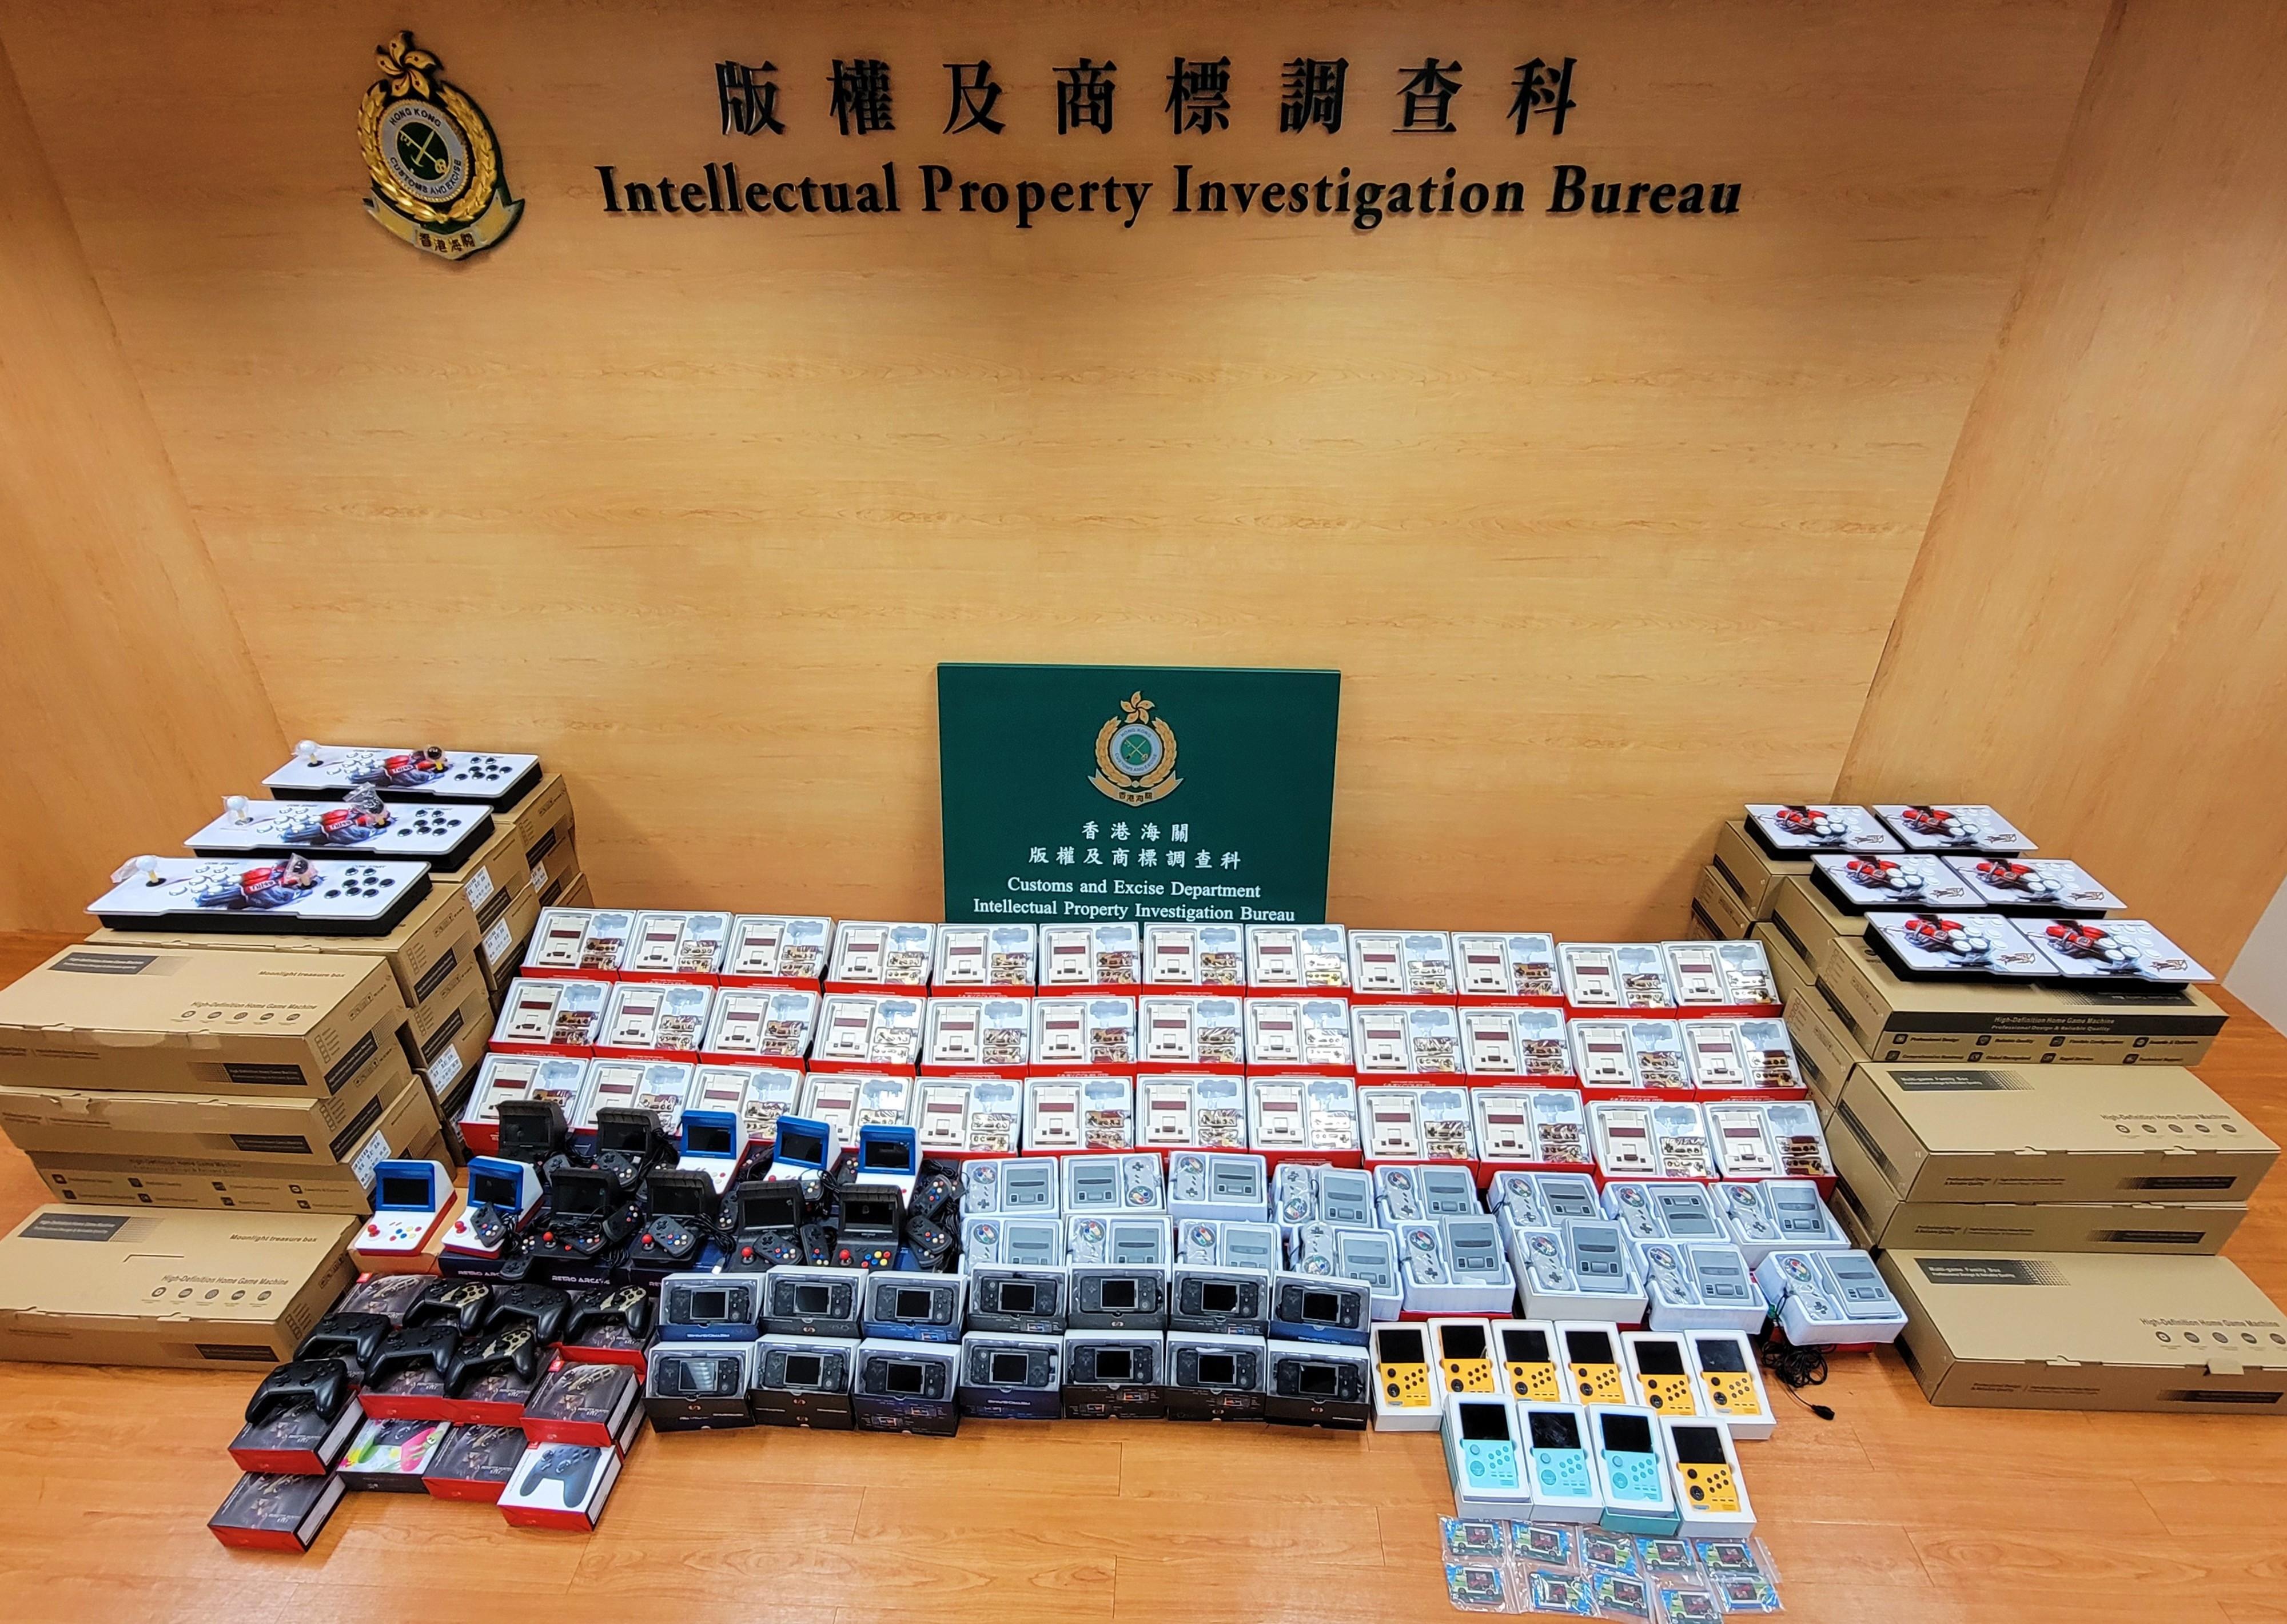 Hong Kong Customs yesterday (May 19) launched a special operation to combat the sale of pirated electronic games and counterfeit gaming accessories. A total of 283 sets of game consoles loaded with suspected pirated electronic games and 160 suspected counterfeit gaming accessories with an estimated market value of about $280,000 were seized. Photo shows some of the suspected pirated and counterfeit goods seized.